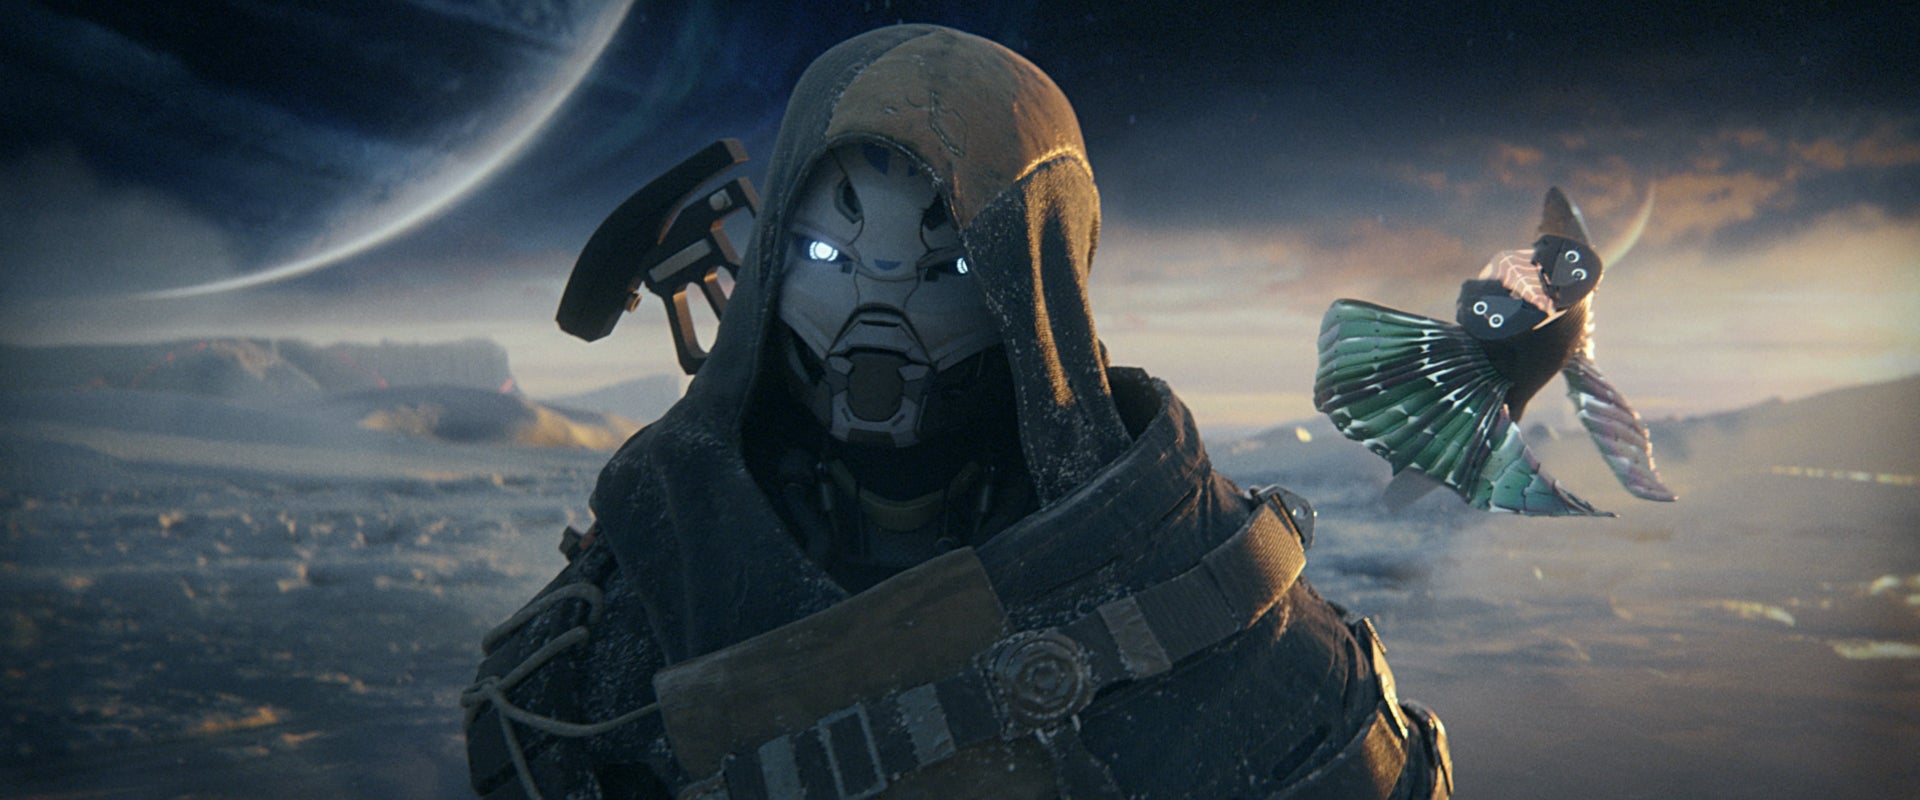 Image for Former Bungie executive says Destiny deal with Activision was "as bad as we thought it to be"